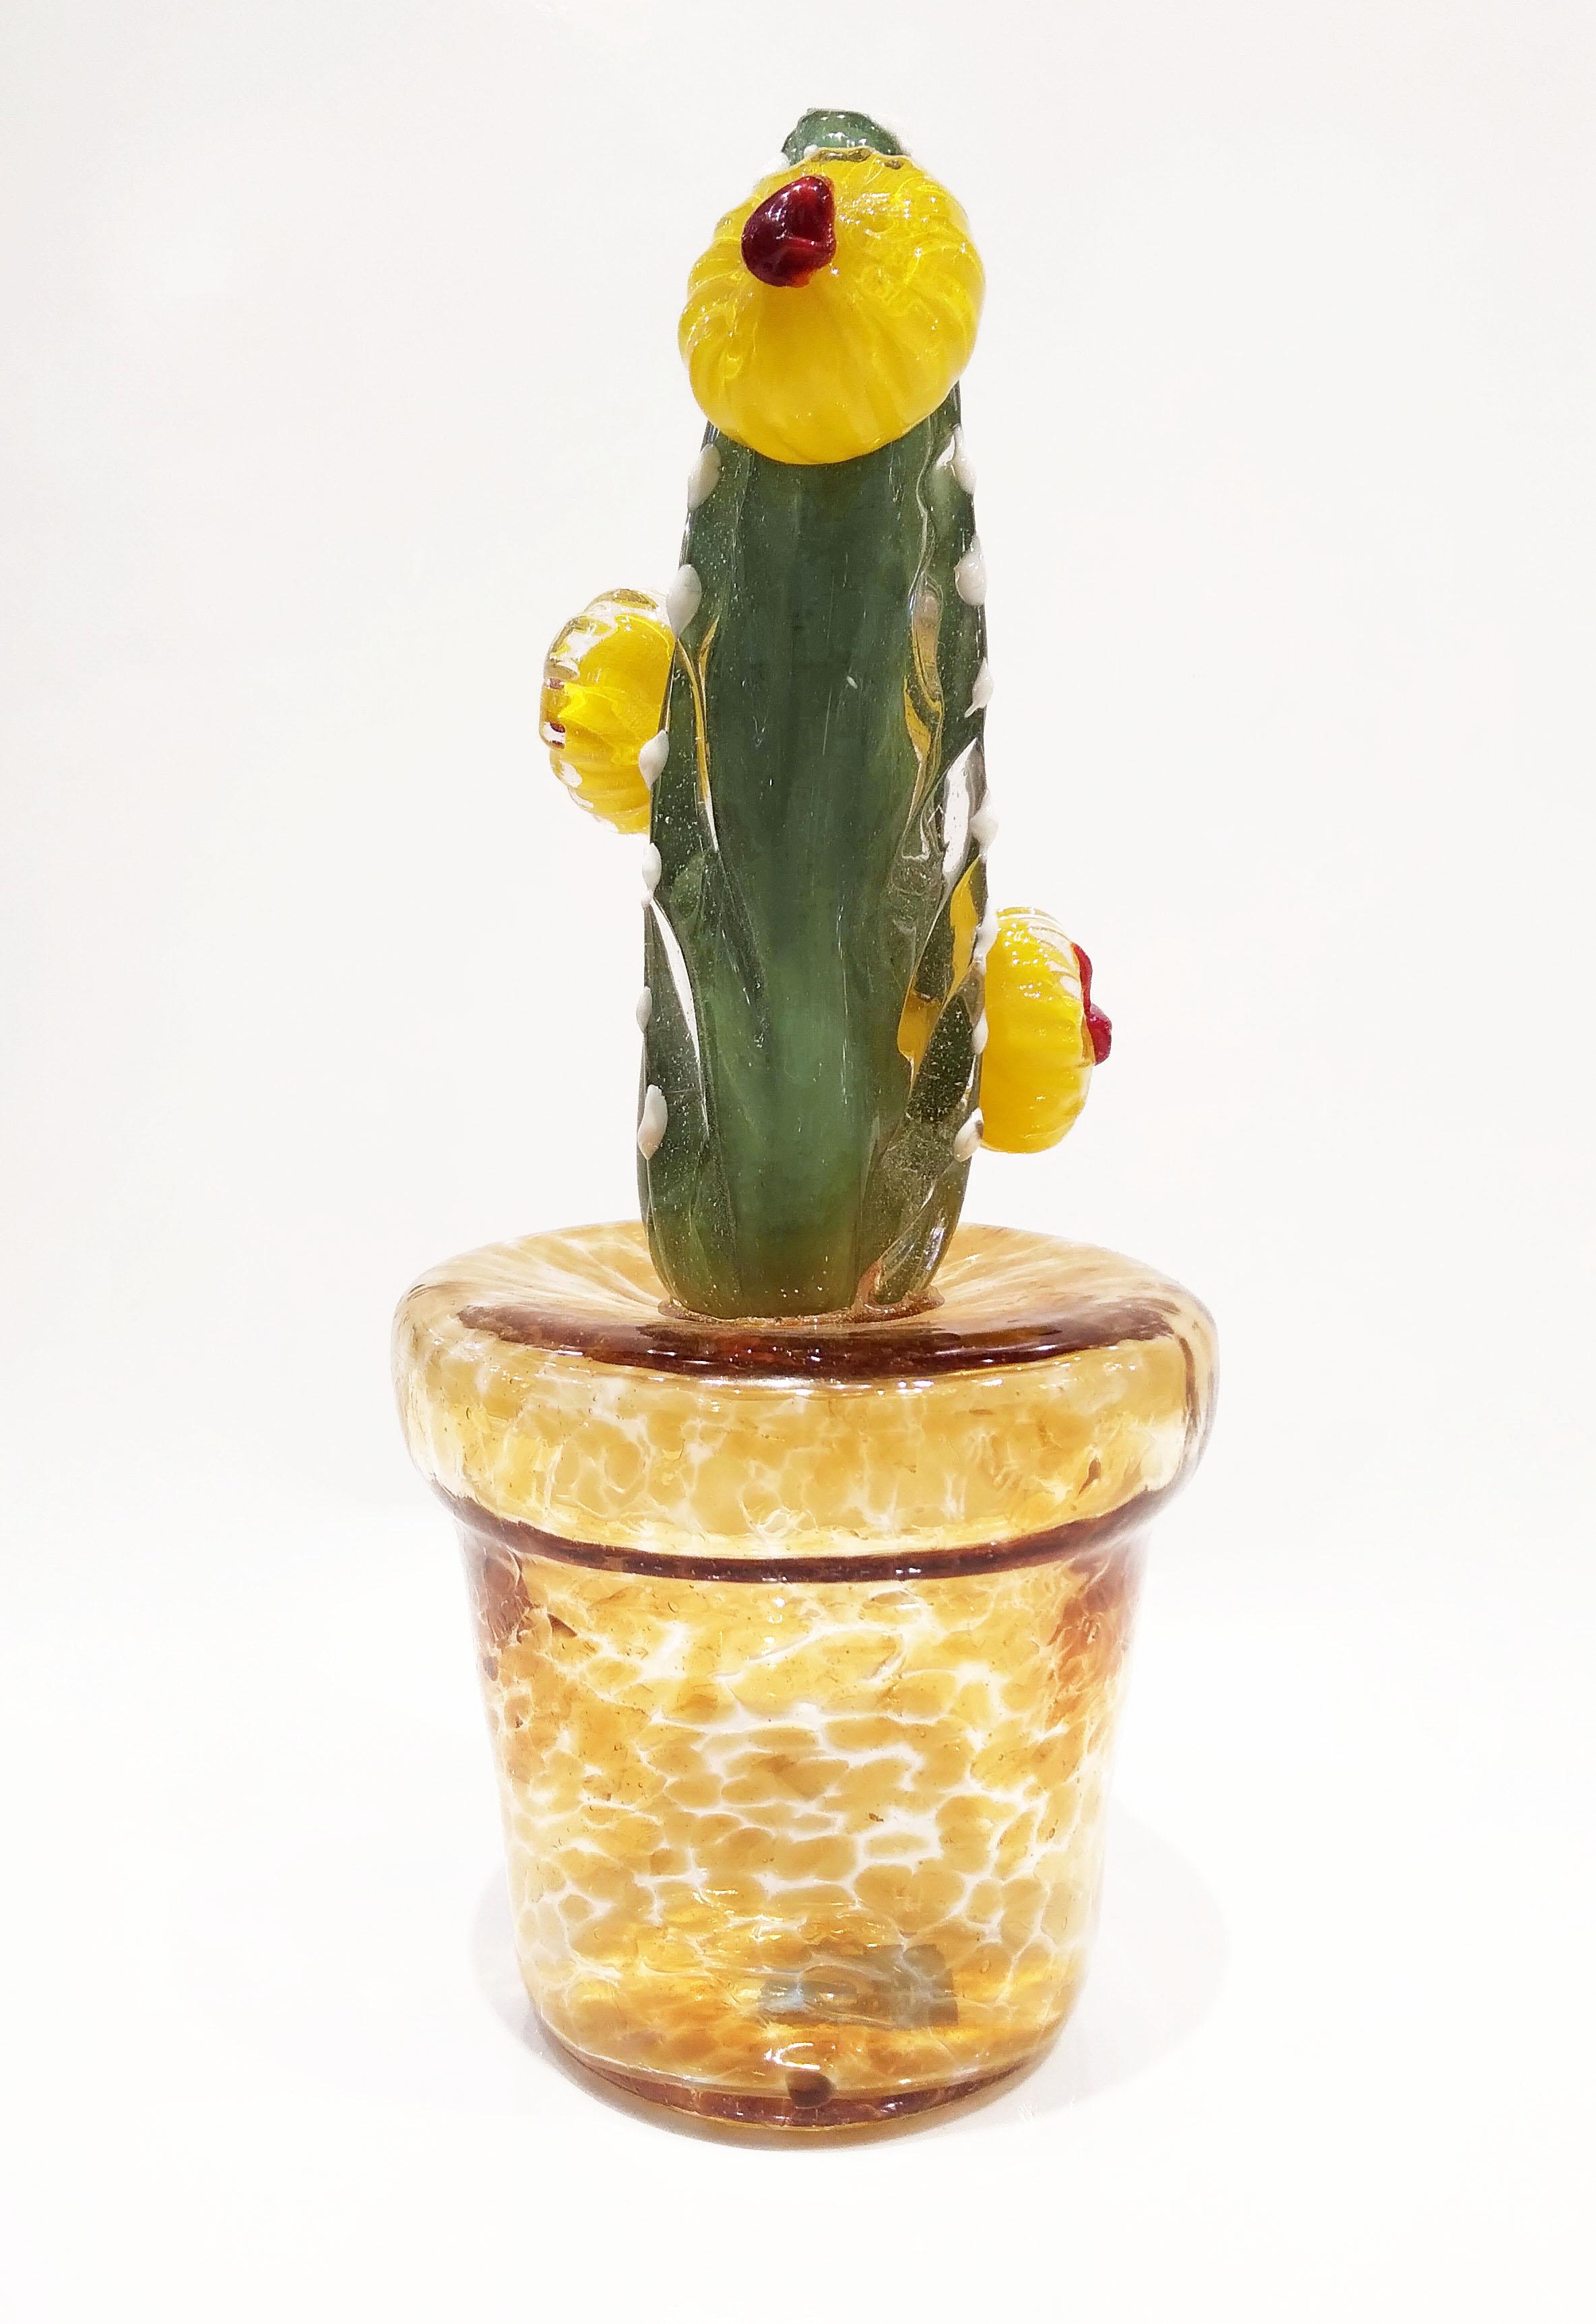 Organic Modern 2000s Italian Green Murano Glass Cactus Plant with Yellow Flowers in Gold Pot For Sale